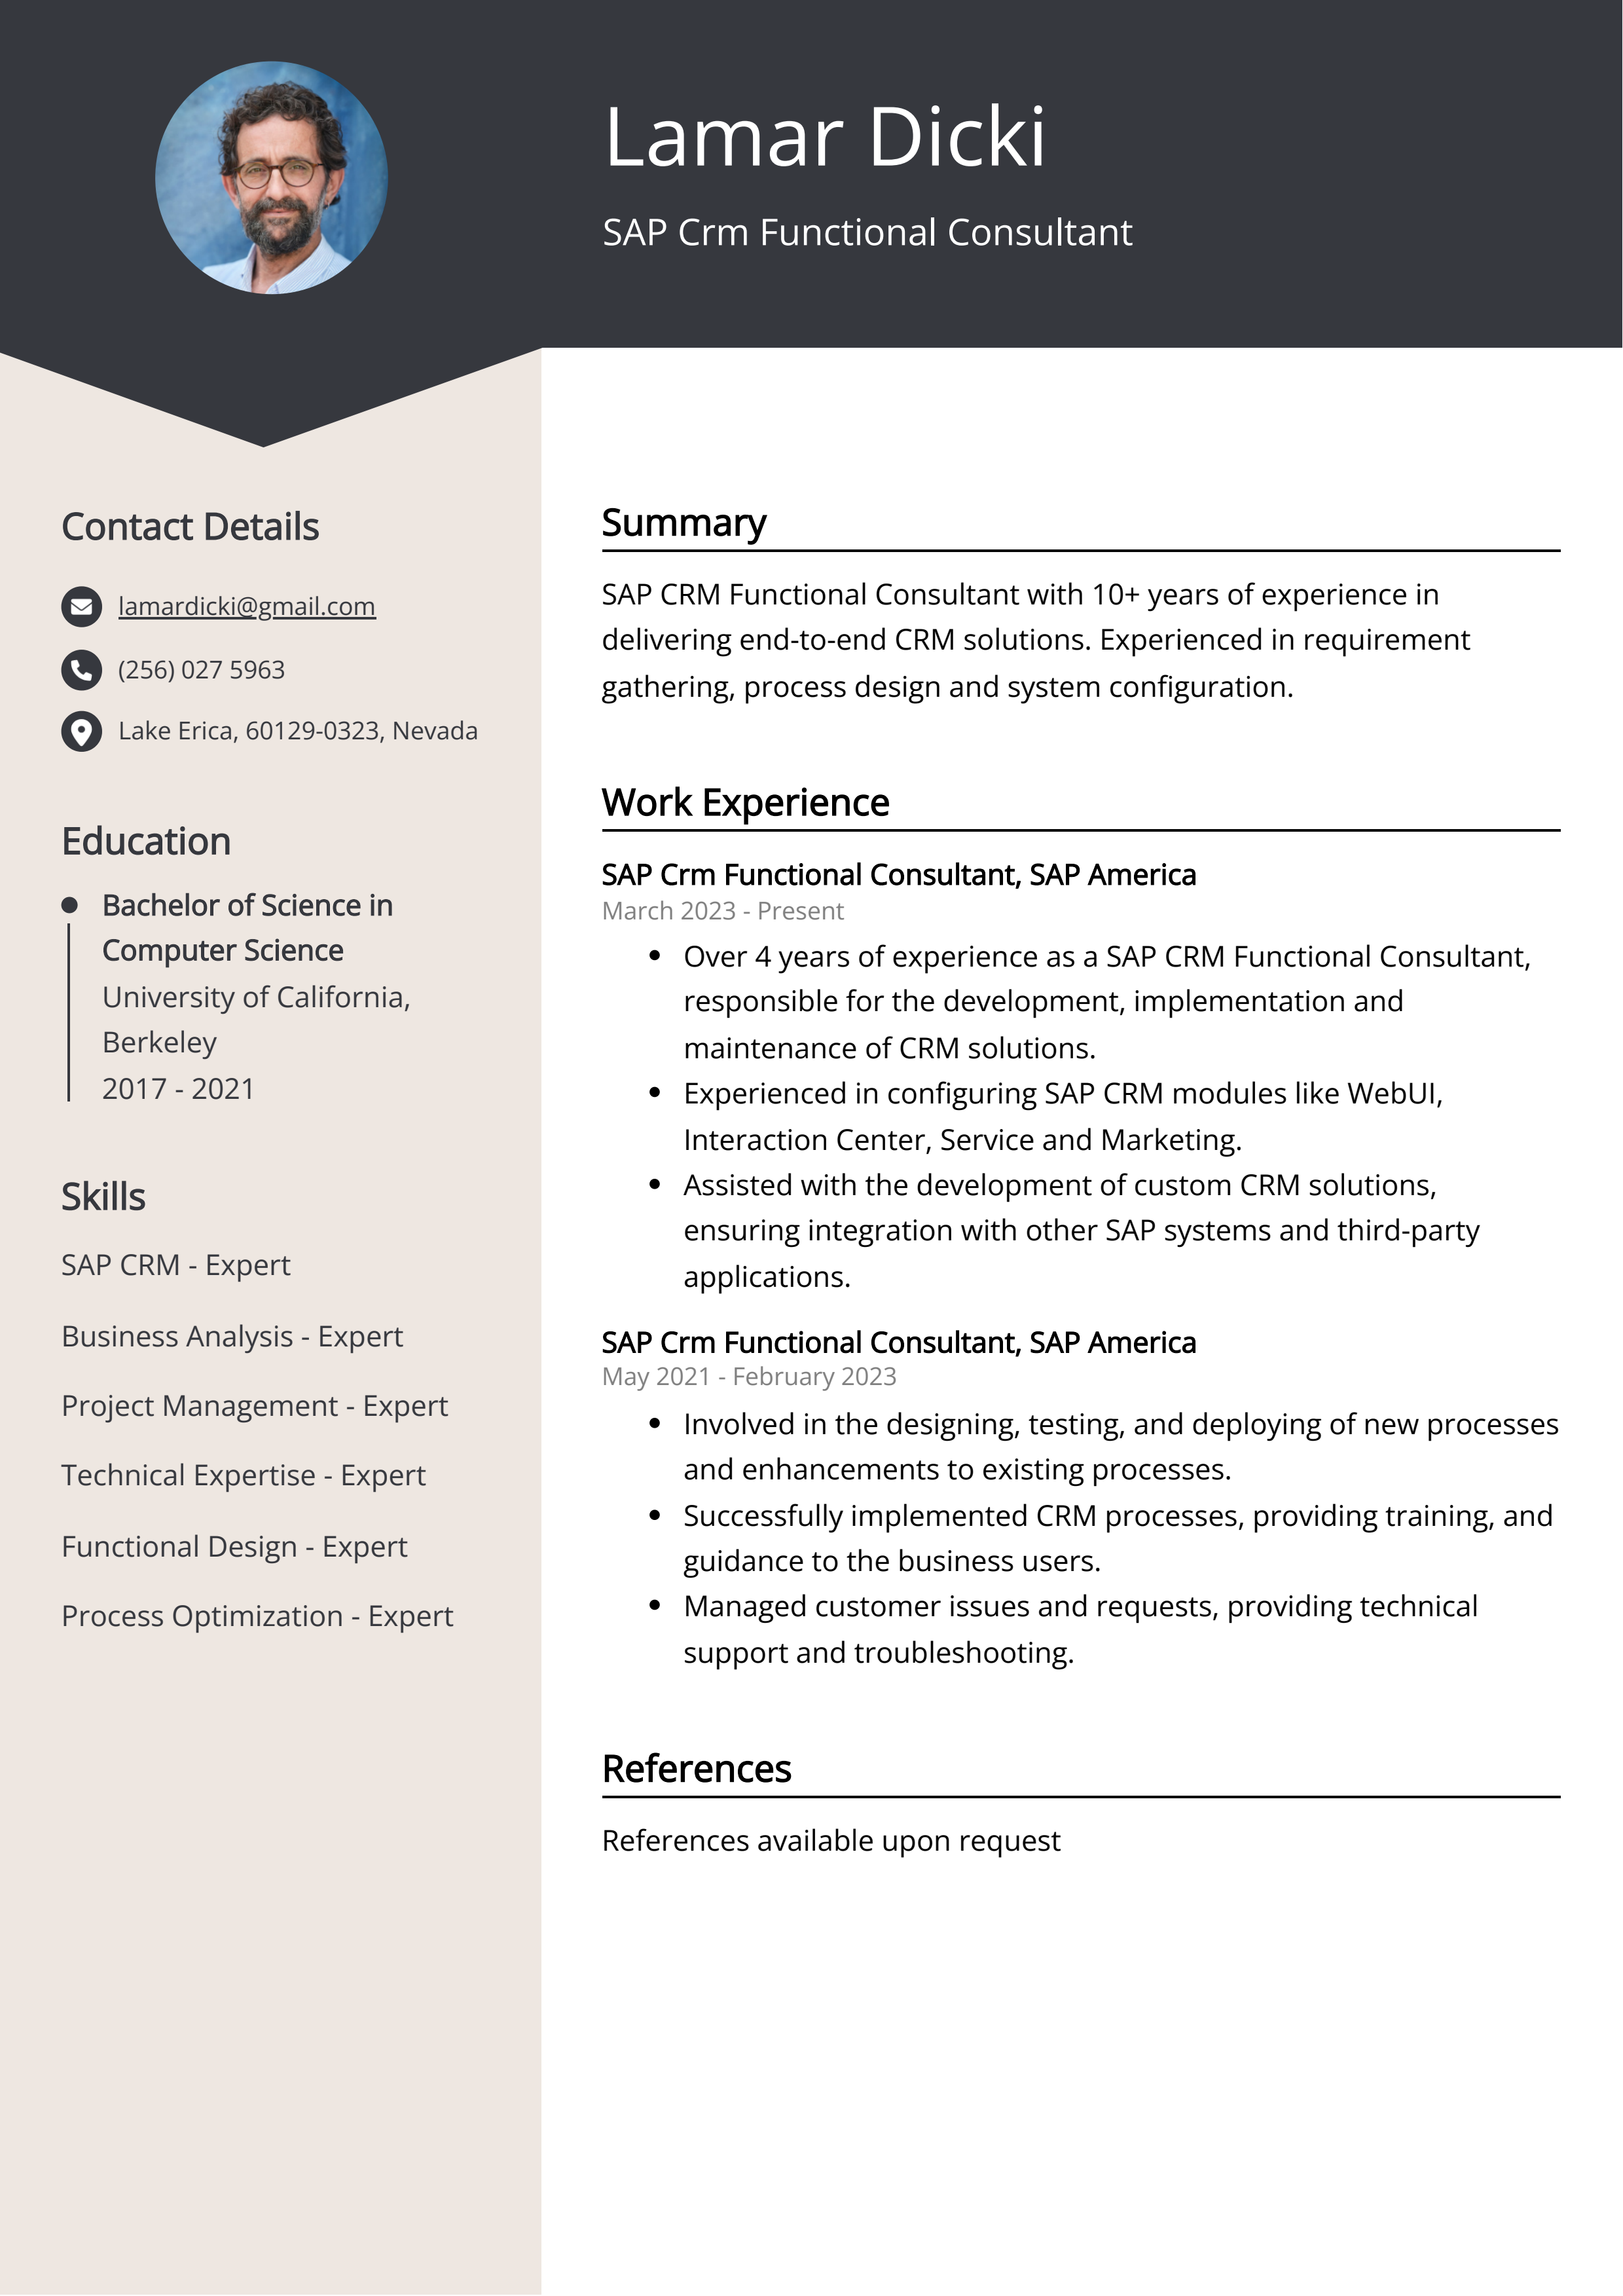 SAP Crm Functional Consultant Resume Example